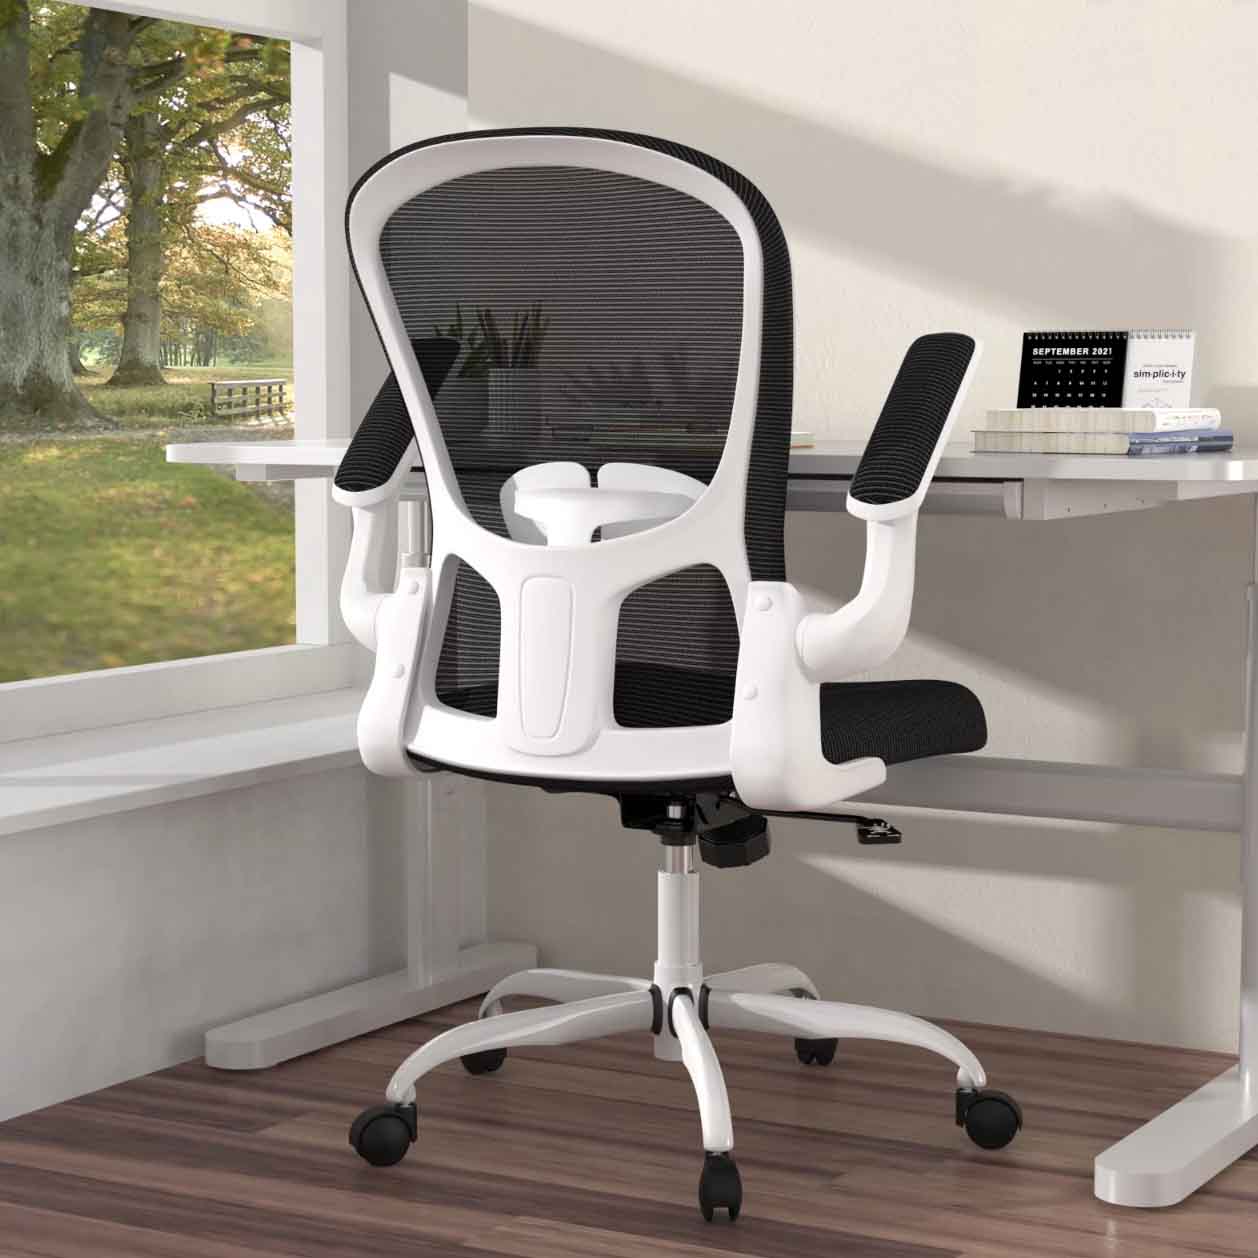 White swivel office chair in office setting